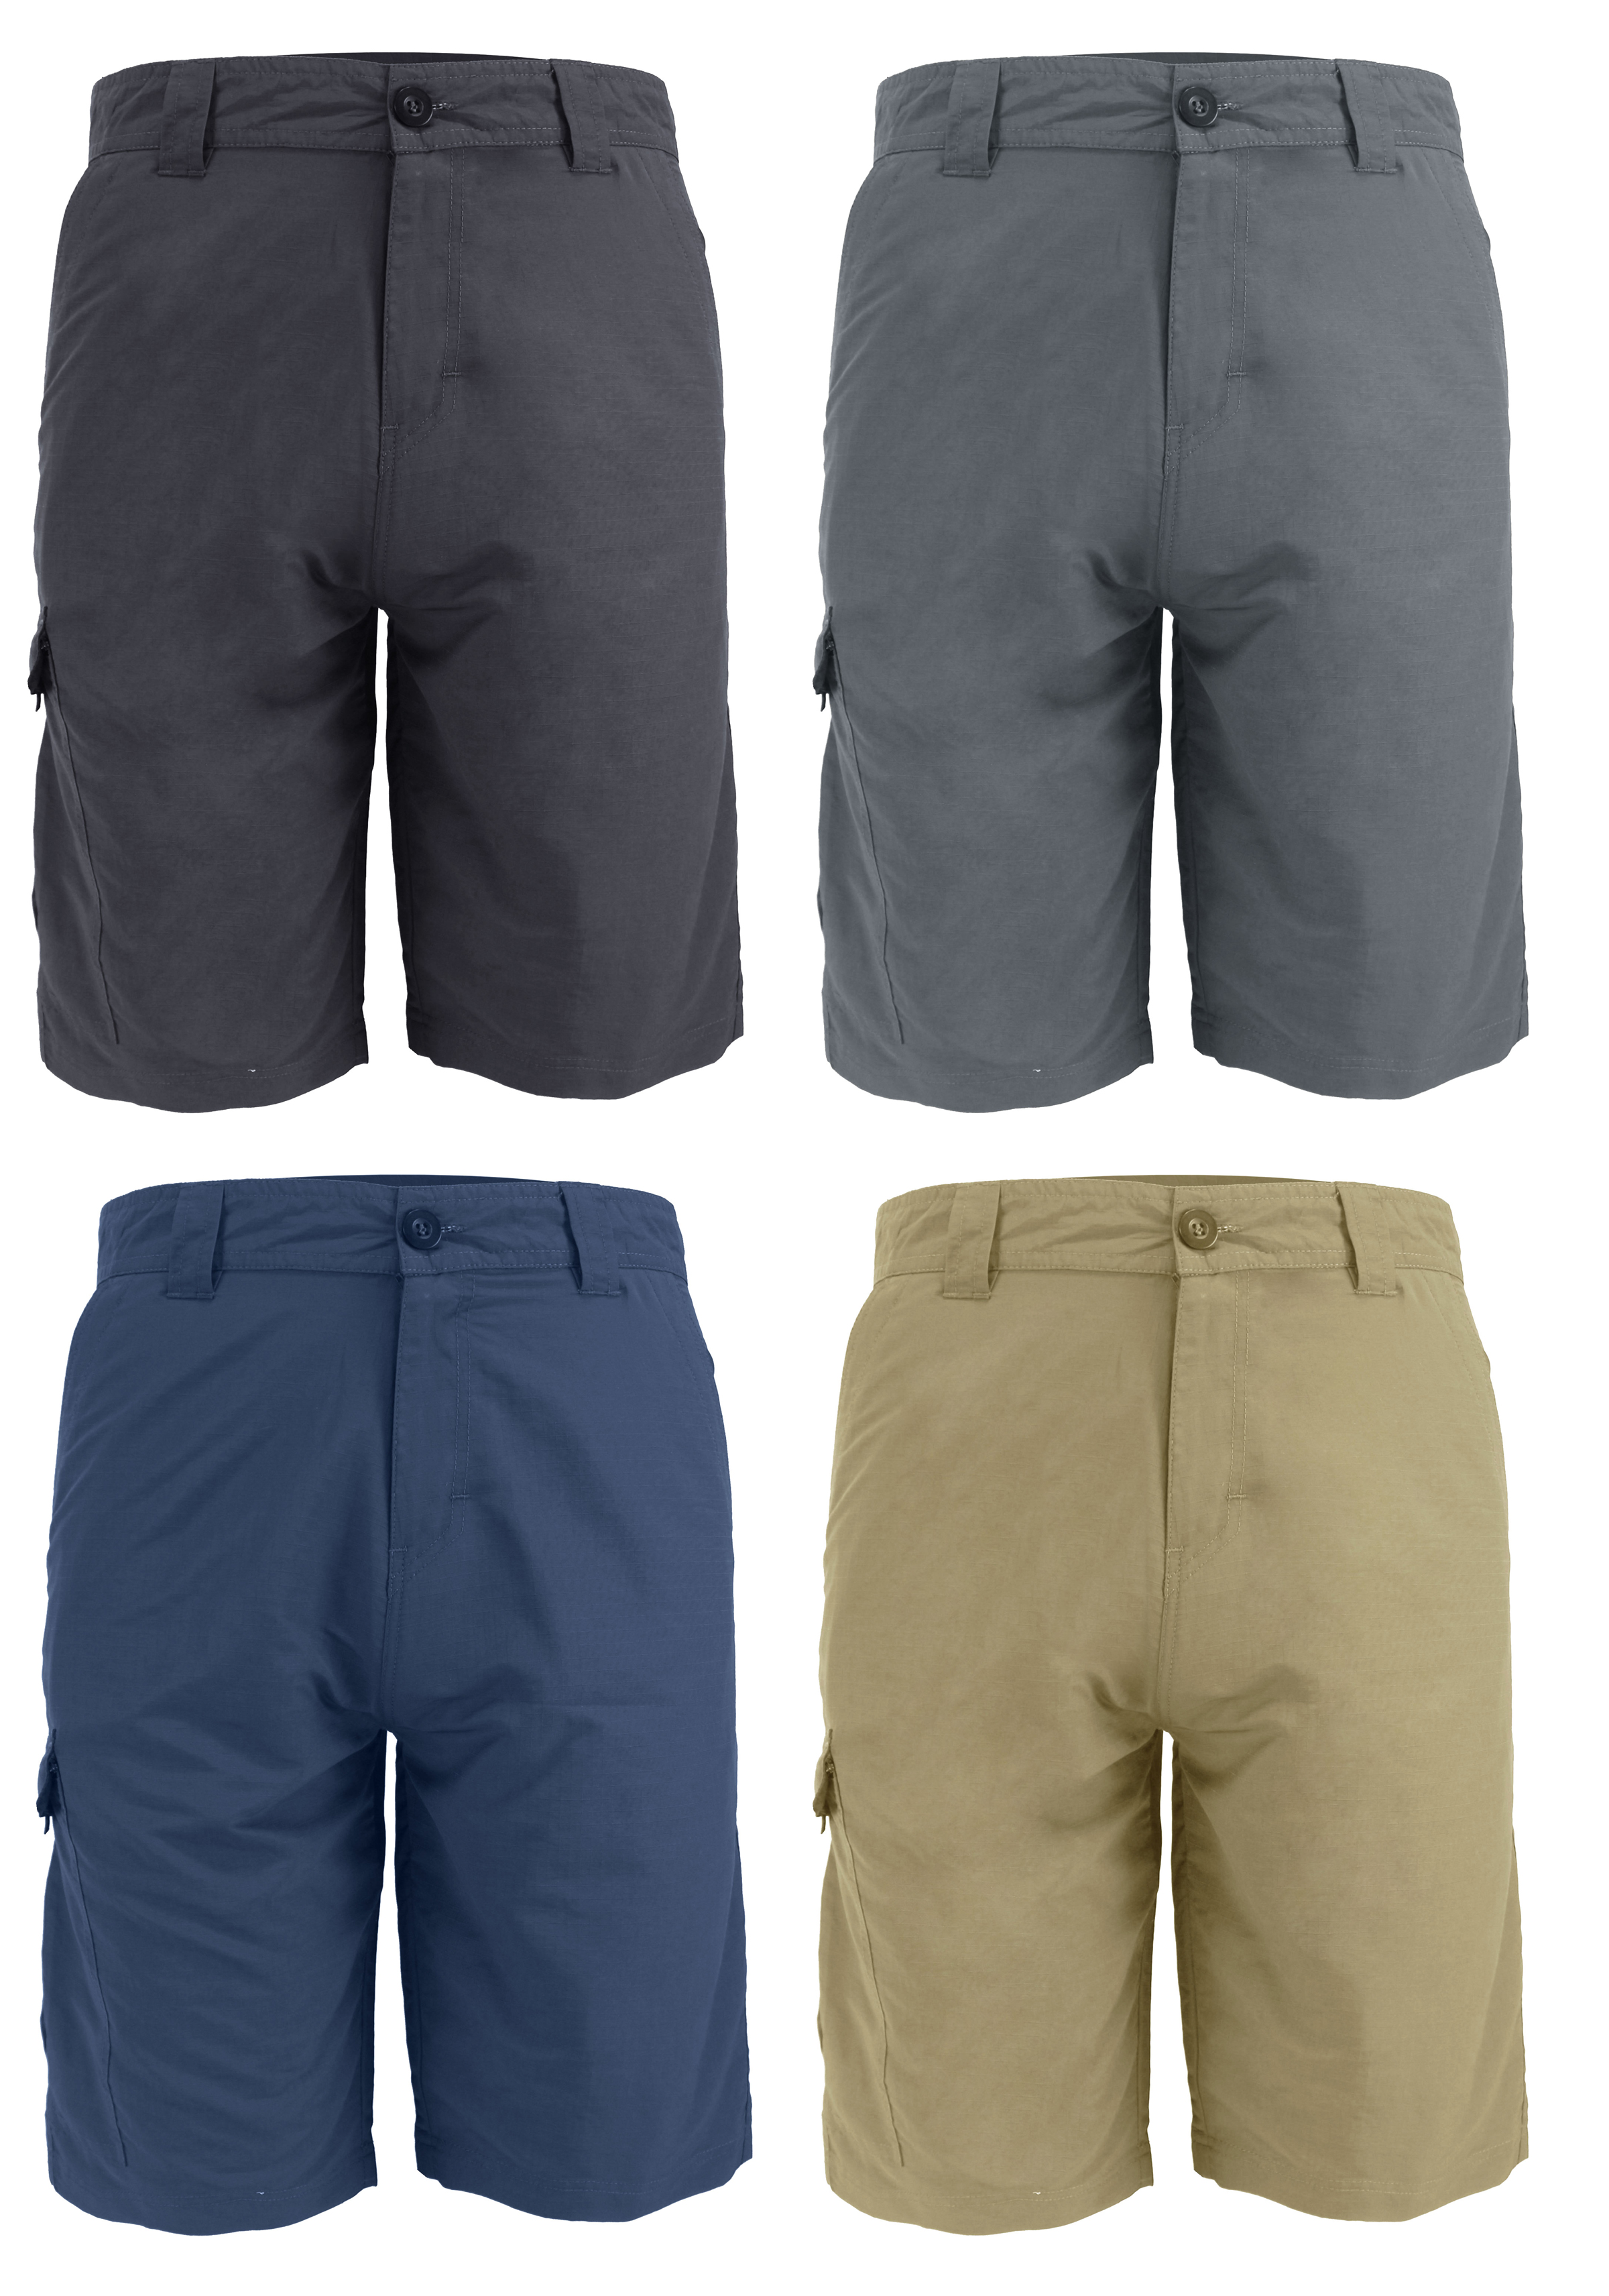 Men's Ripstop CARGO SHORTS - Solid Colors - Sizes 30-40